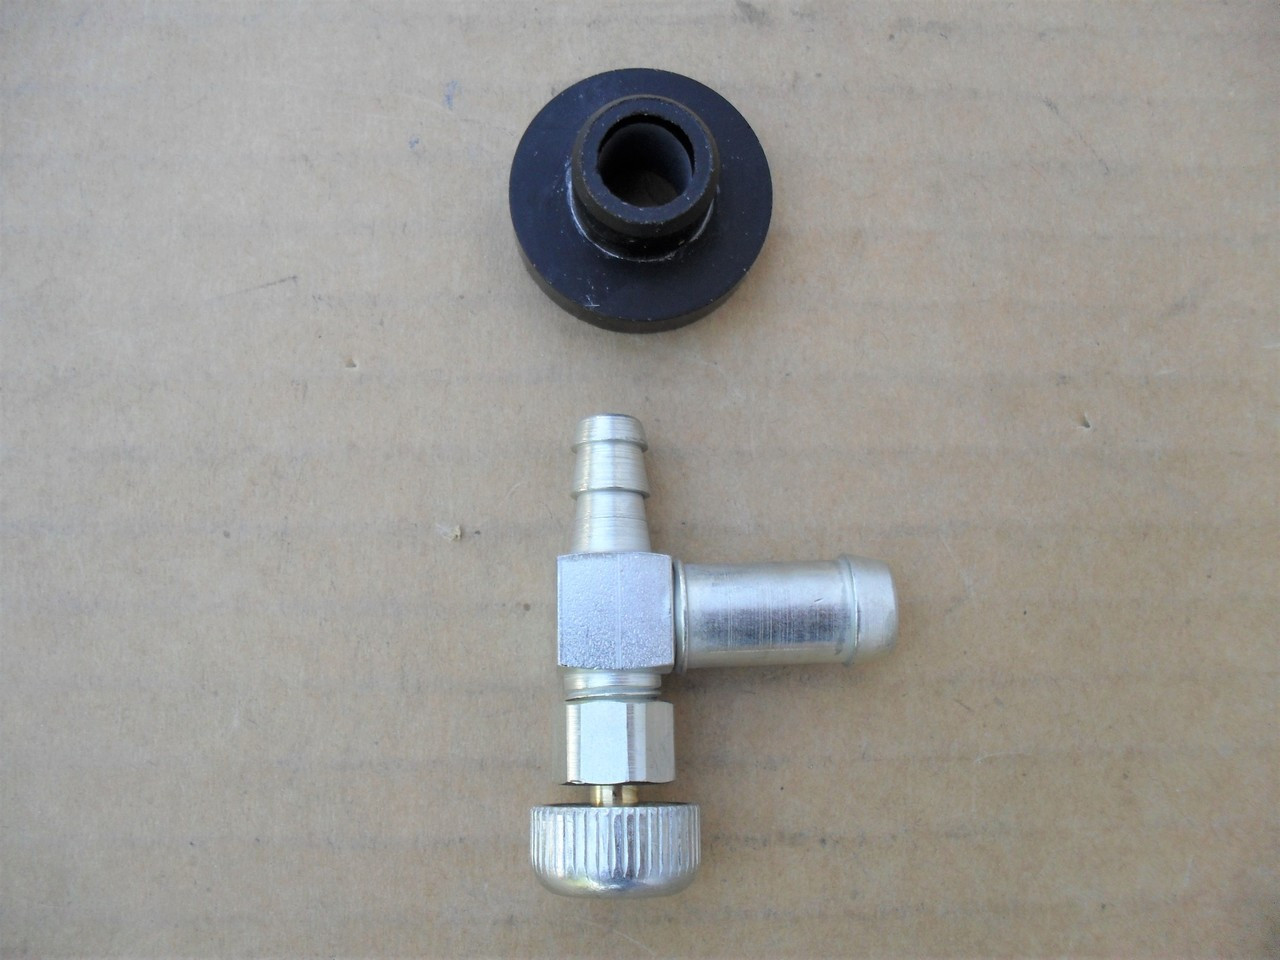 Gas Tank Fuel Shut Off Valve With Rubber Bushing for Snapper 12337 1654930 1654930SM 7012337 1-2337